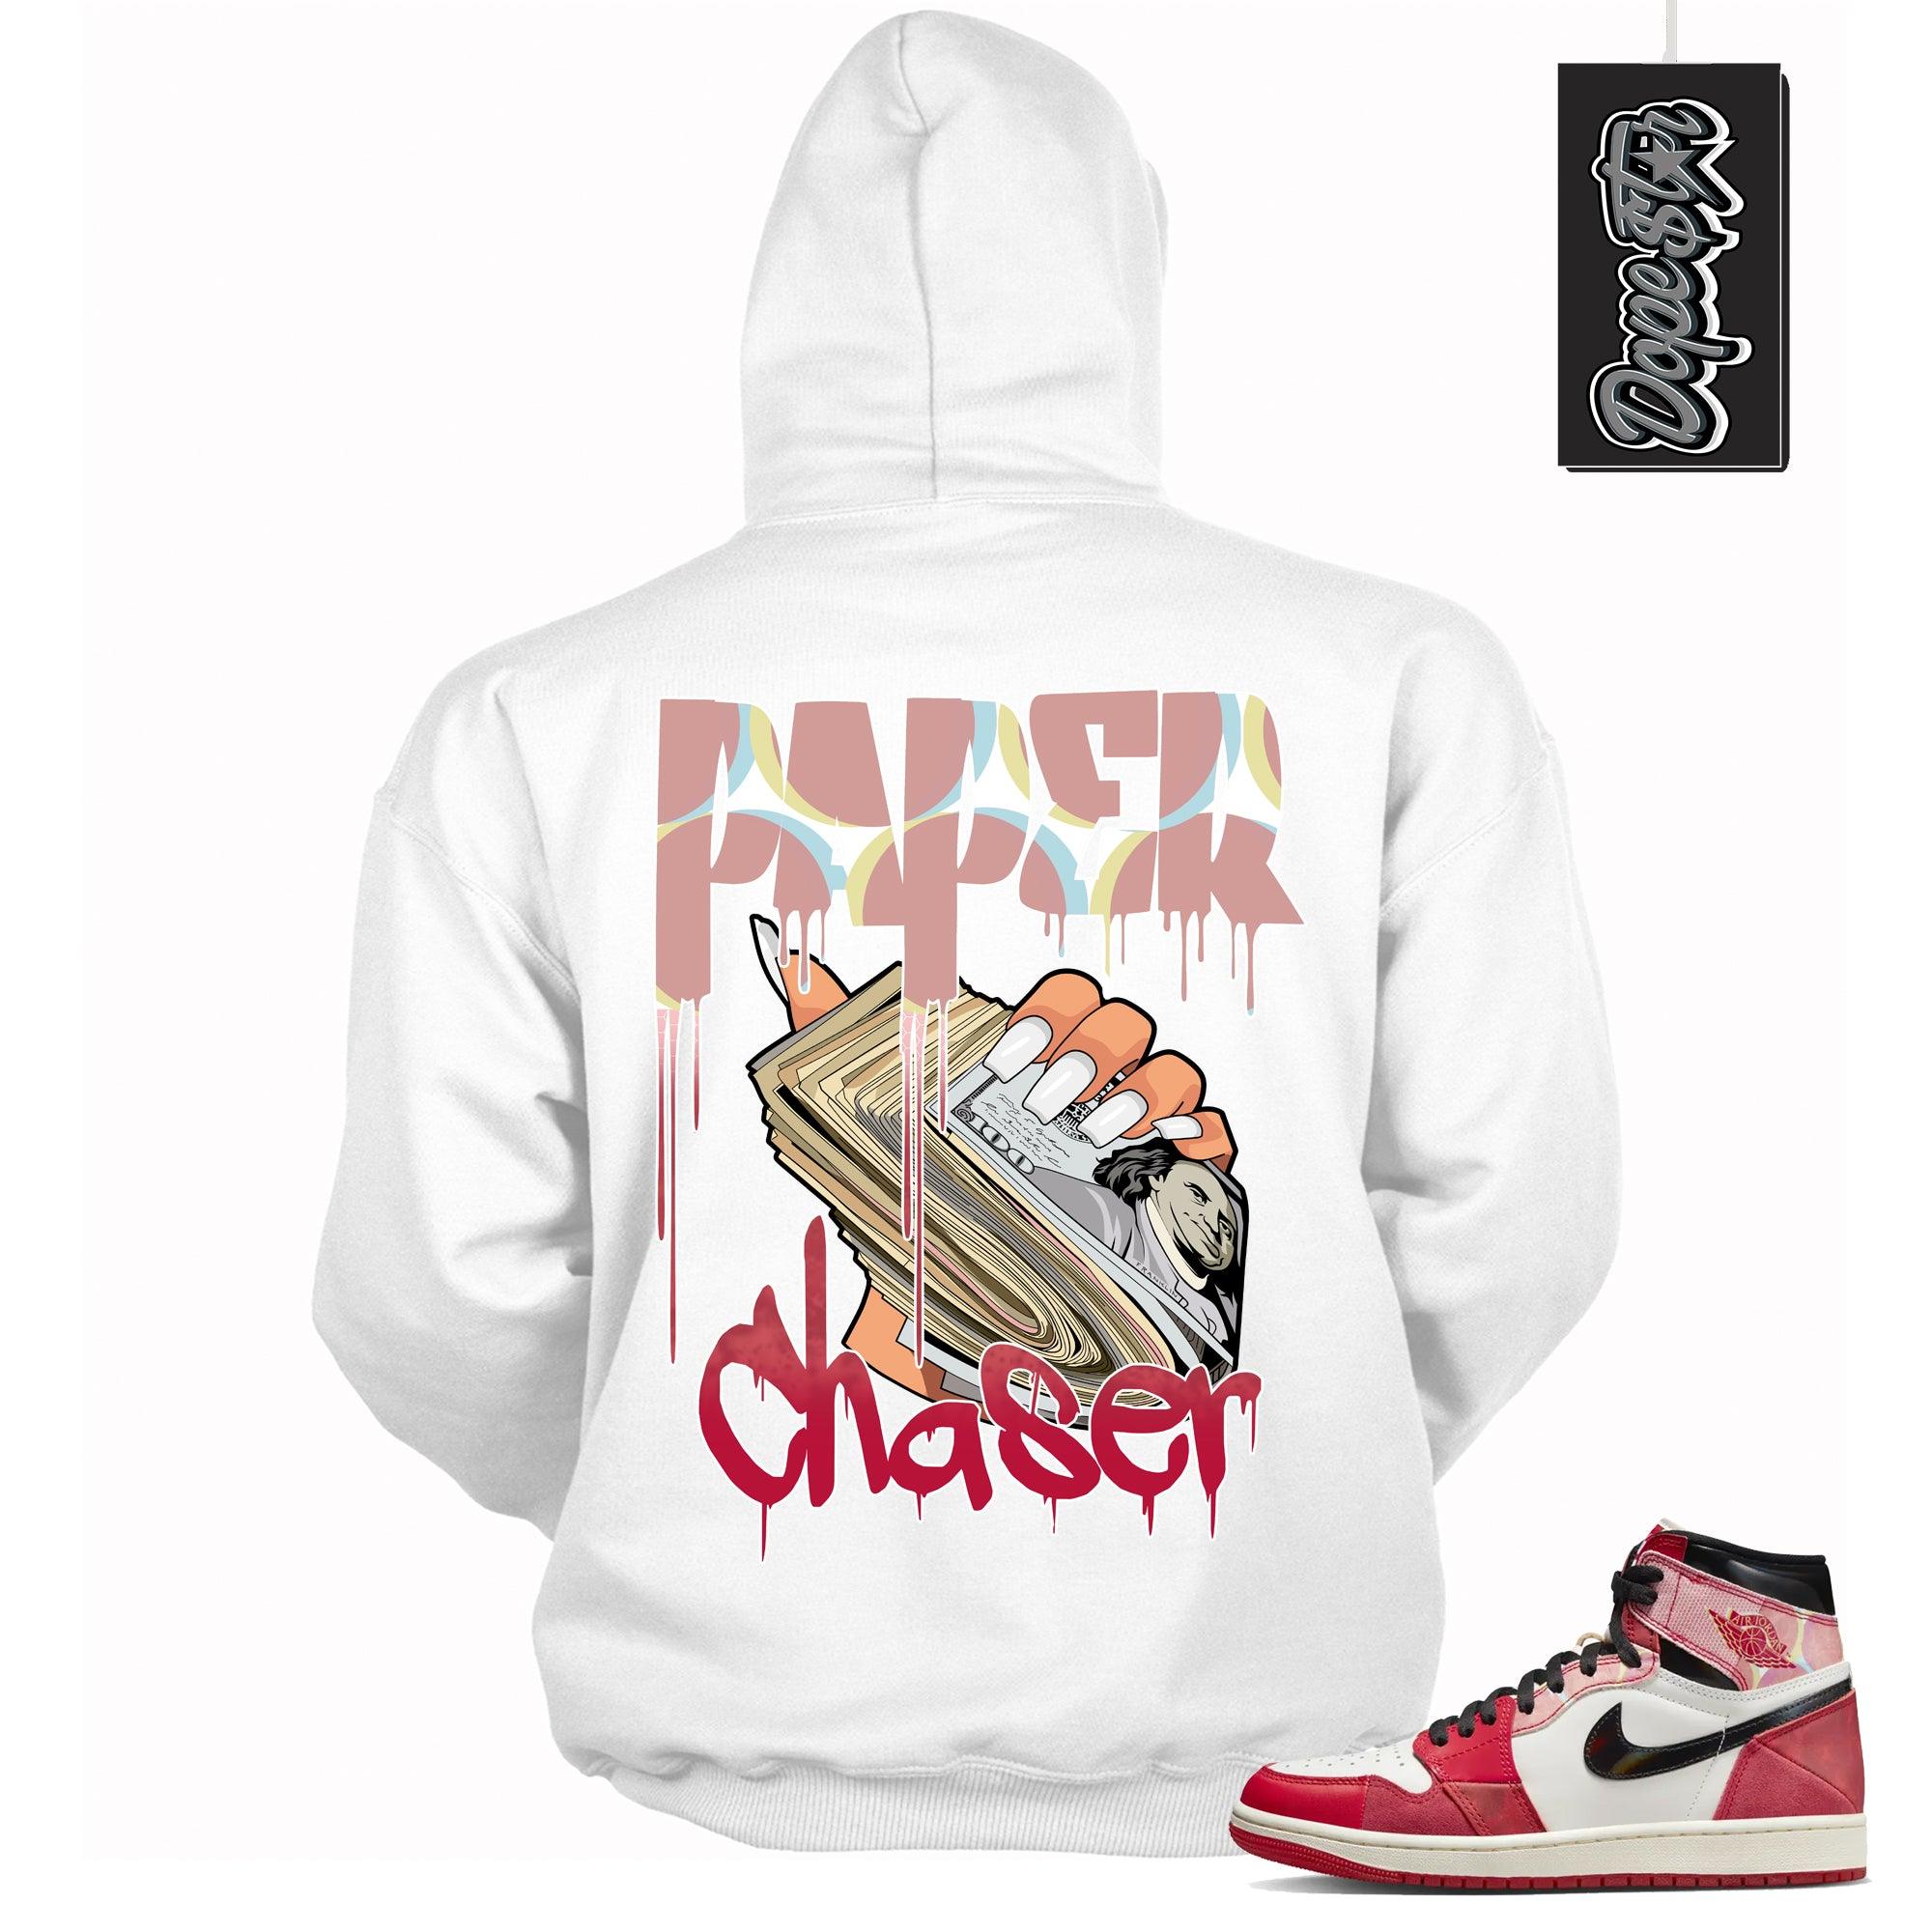 Cool White graphic tee with “ Paper Chaser ” print, that perfectly matches AIR JORDAN 1 Retro High OG NEXT CHAPTER SPIDER-VERSE sneakers